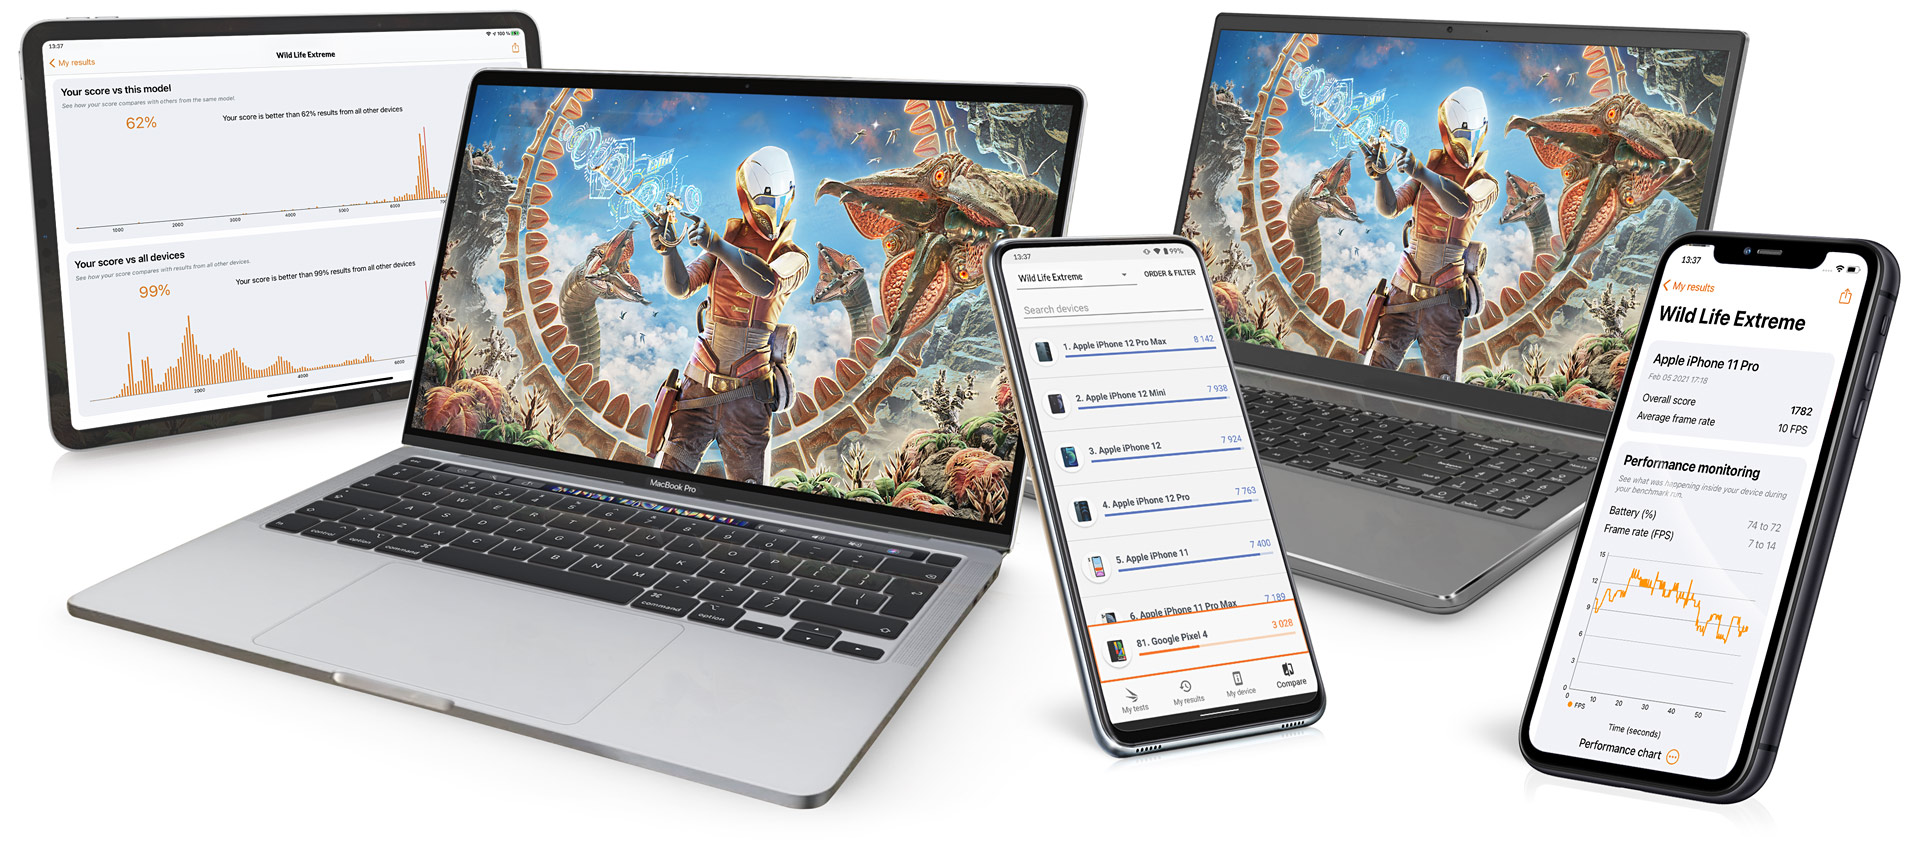 3DMark Wild Life Extreme cross-platform benchmark running on a laptop, tablet and phone